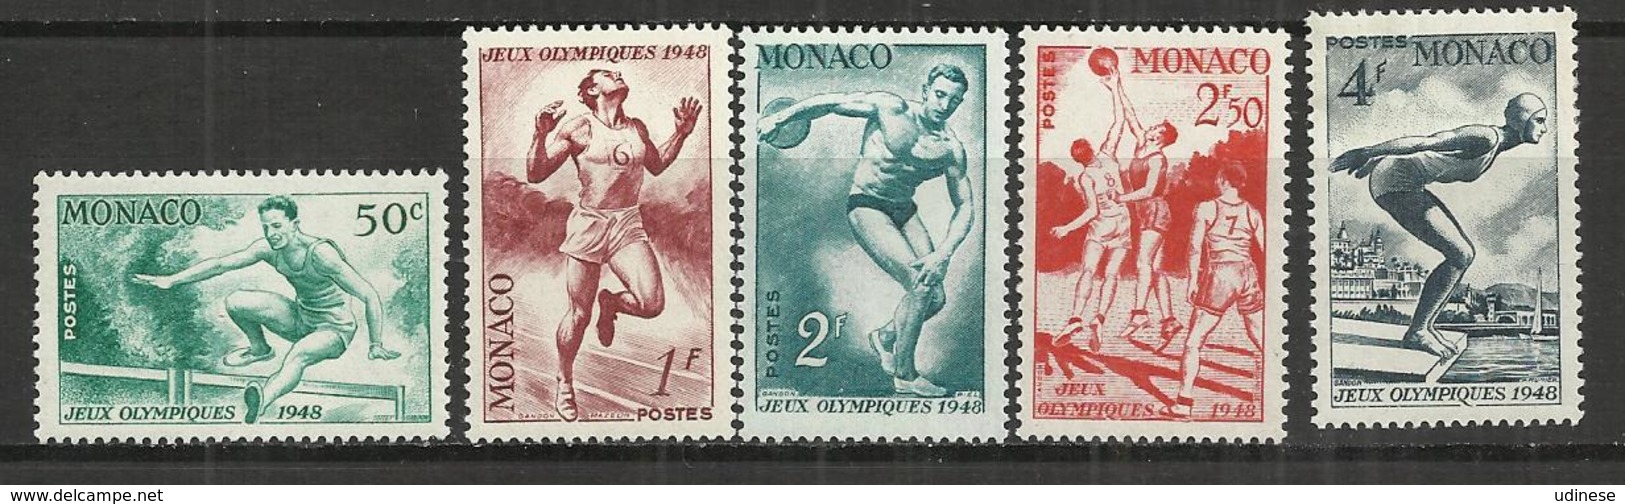 MONACO 1948 - OLYMPIC GAMES - LOT OF 5 DIFFERENT - MNH NEUF MINT NUEVO - Summer 1948: London